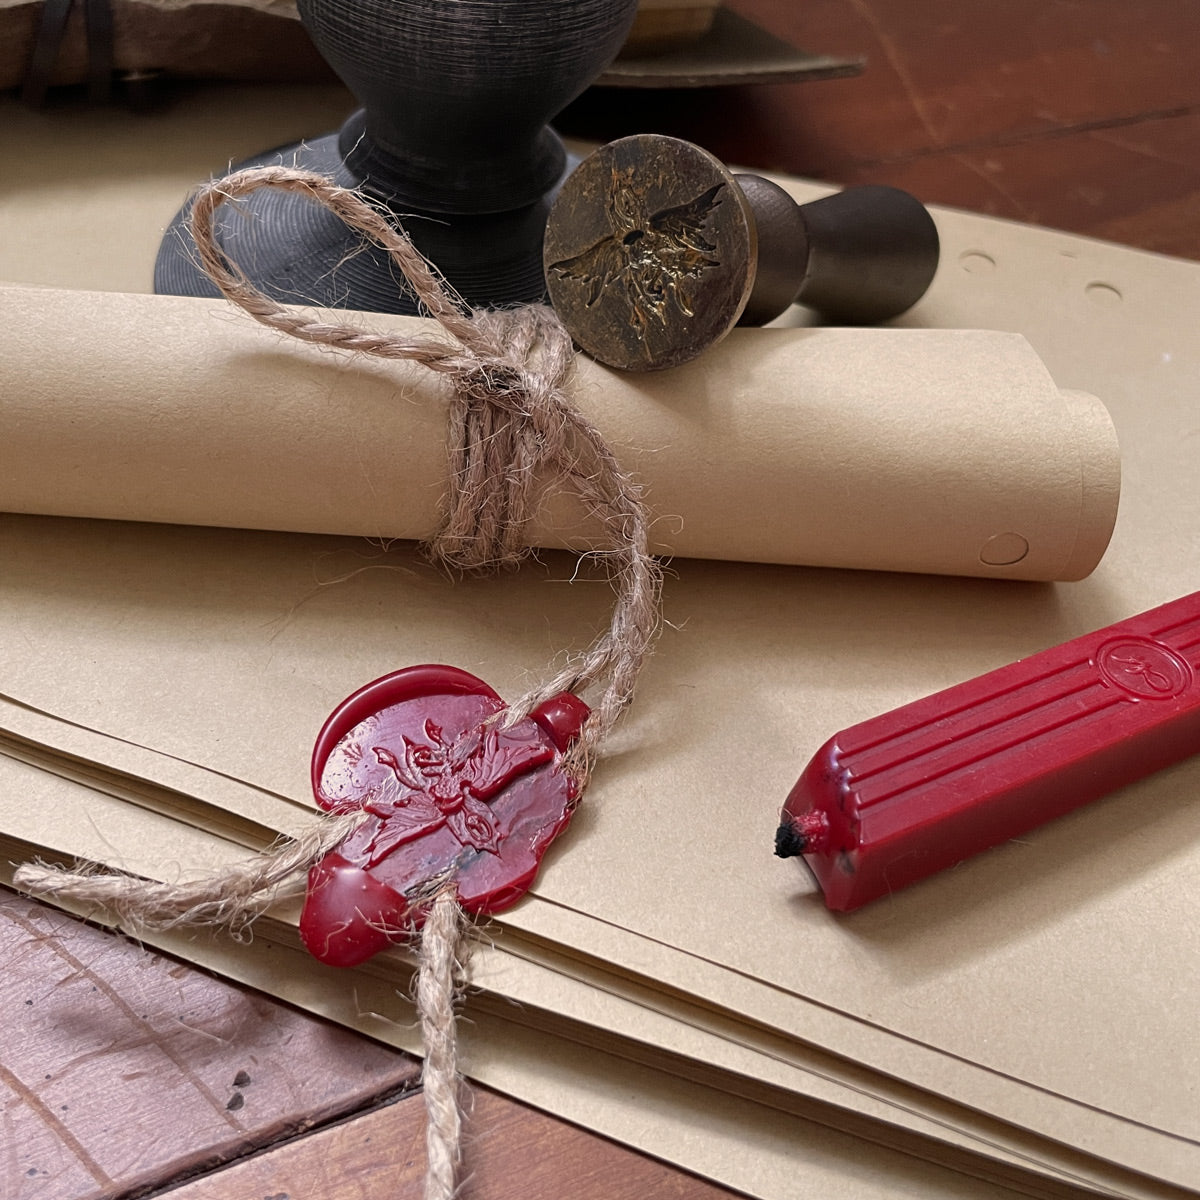 Count Strahd’s Wax Seal Stamp